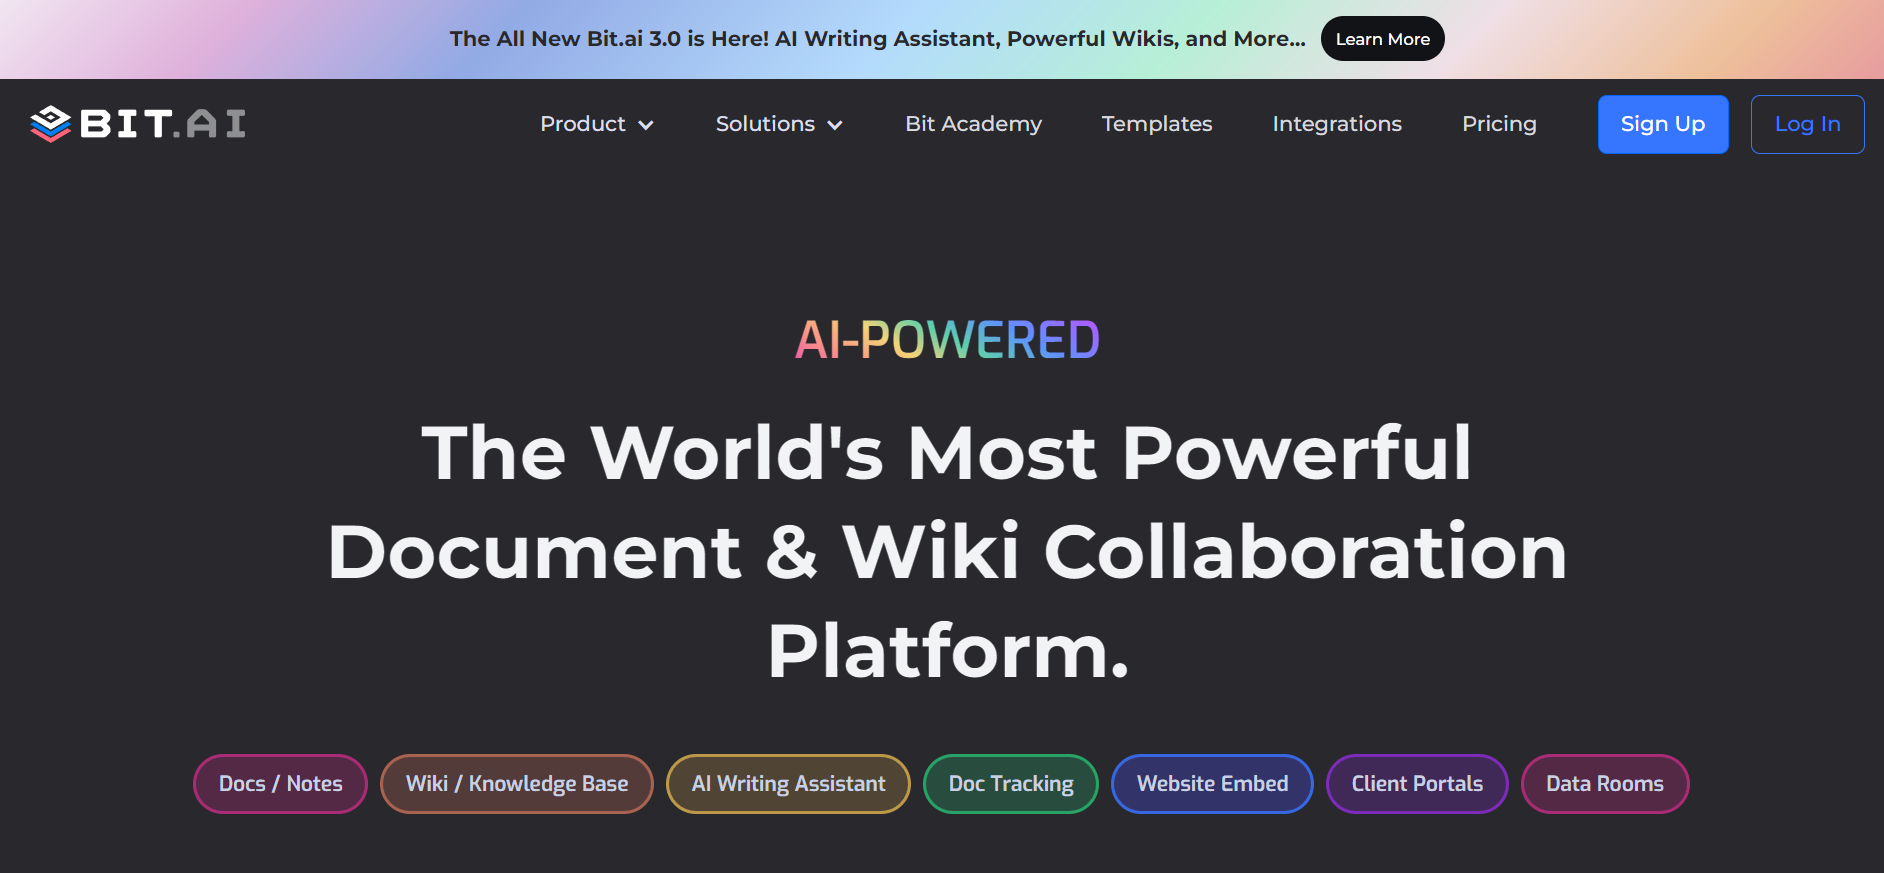 Steps to Add a Wiki on Your Website with Bit.ai